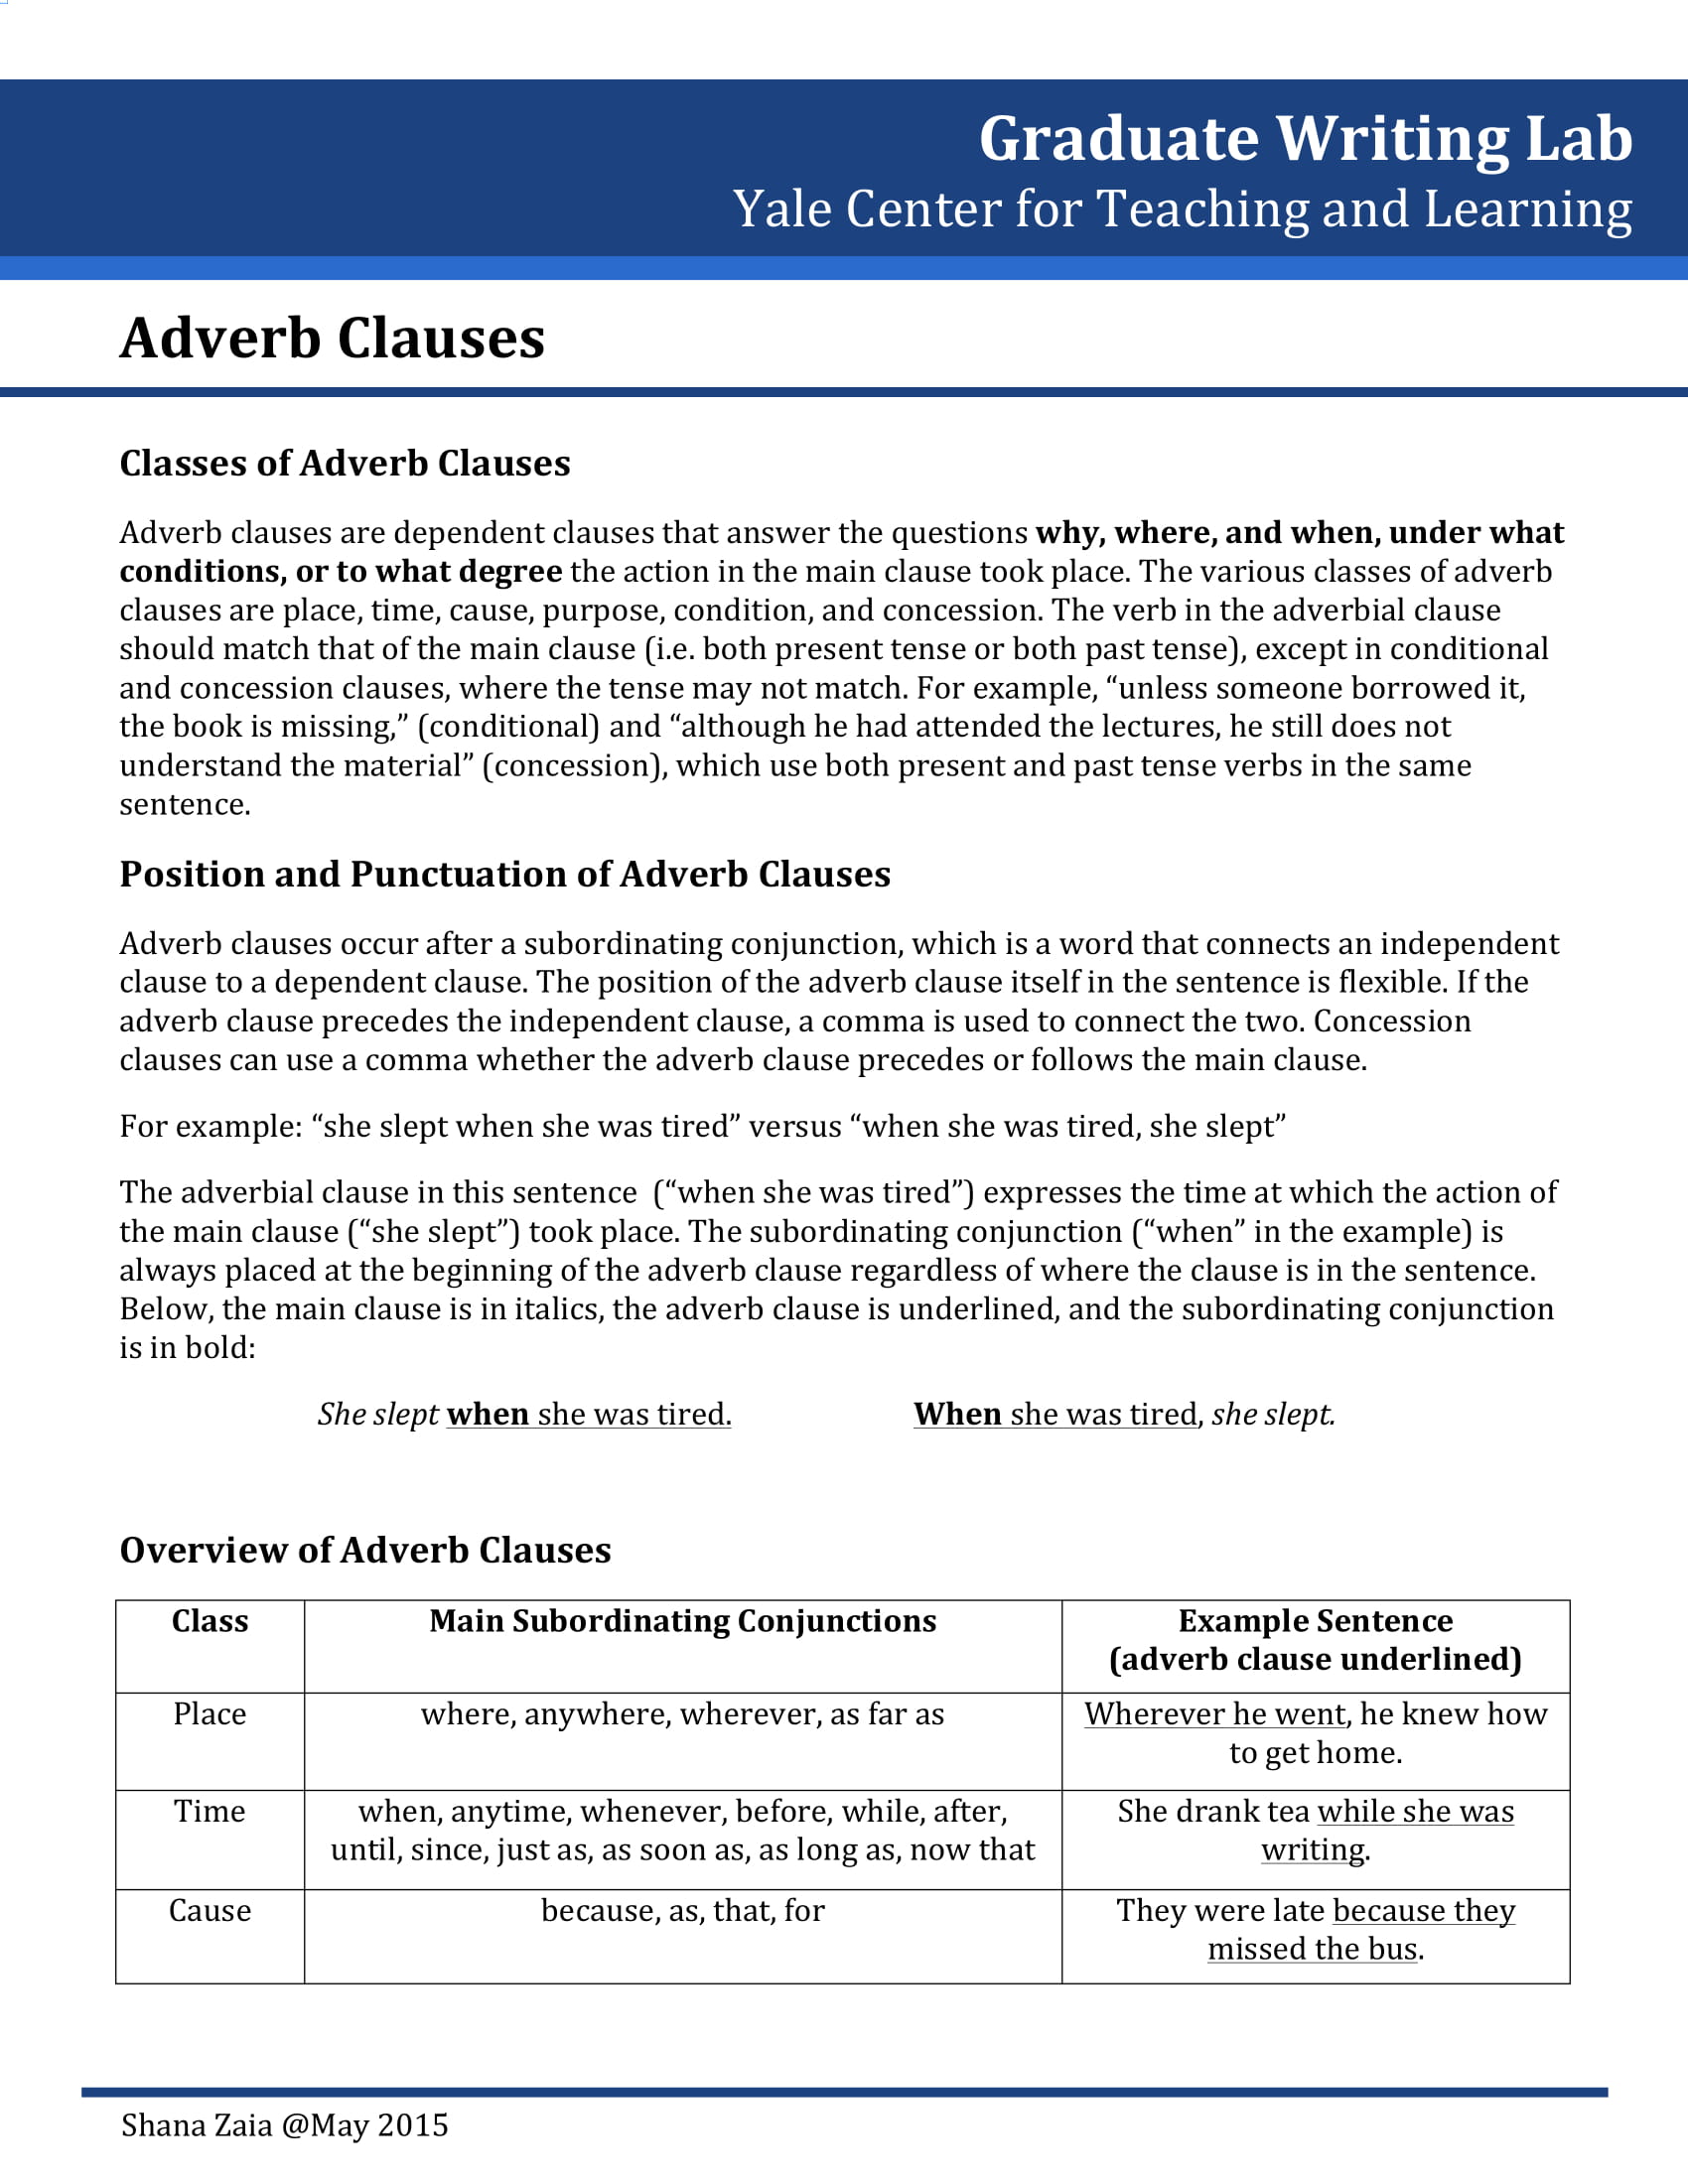 adverb clause guide example